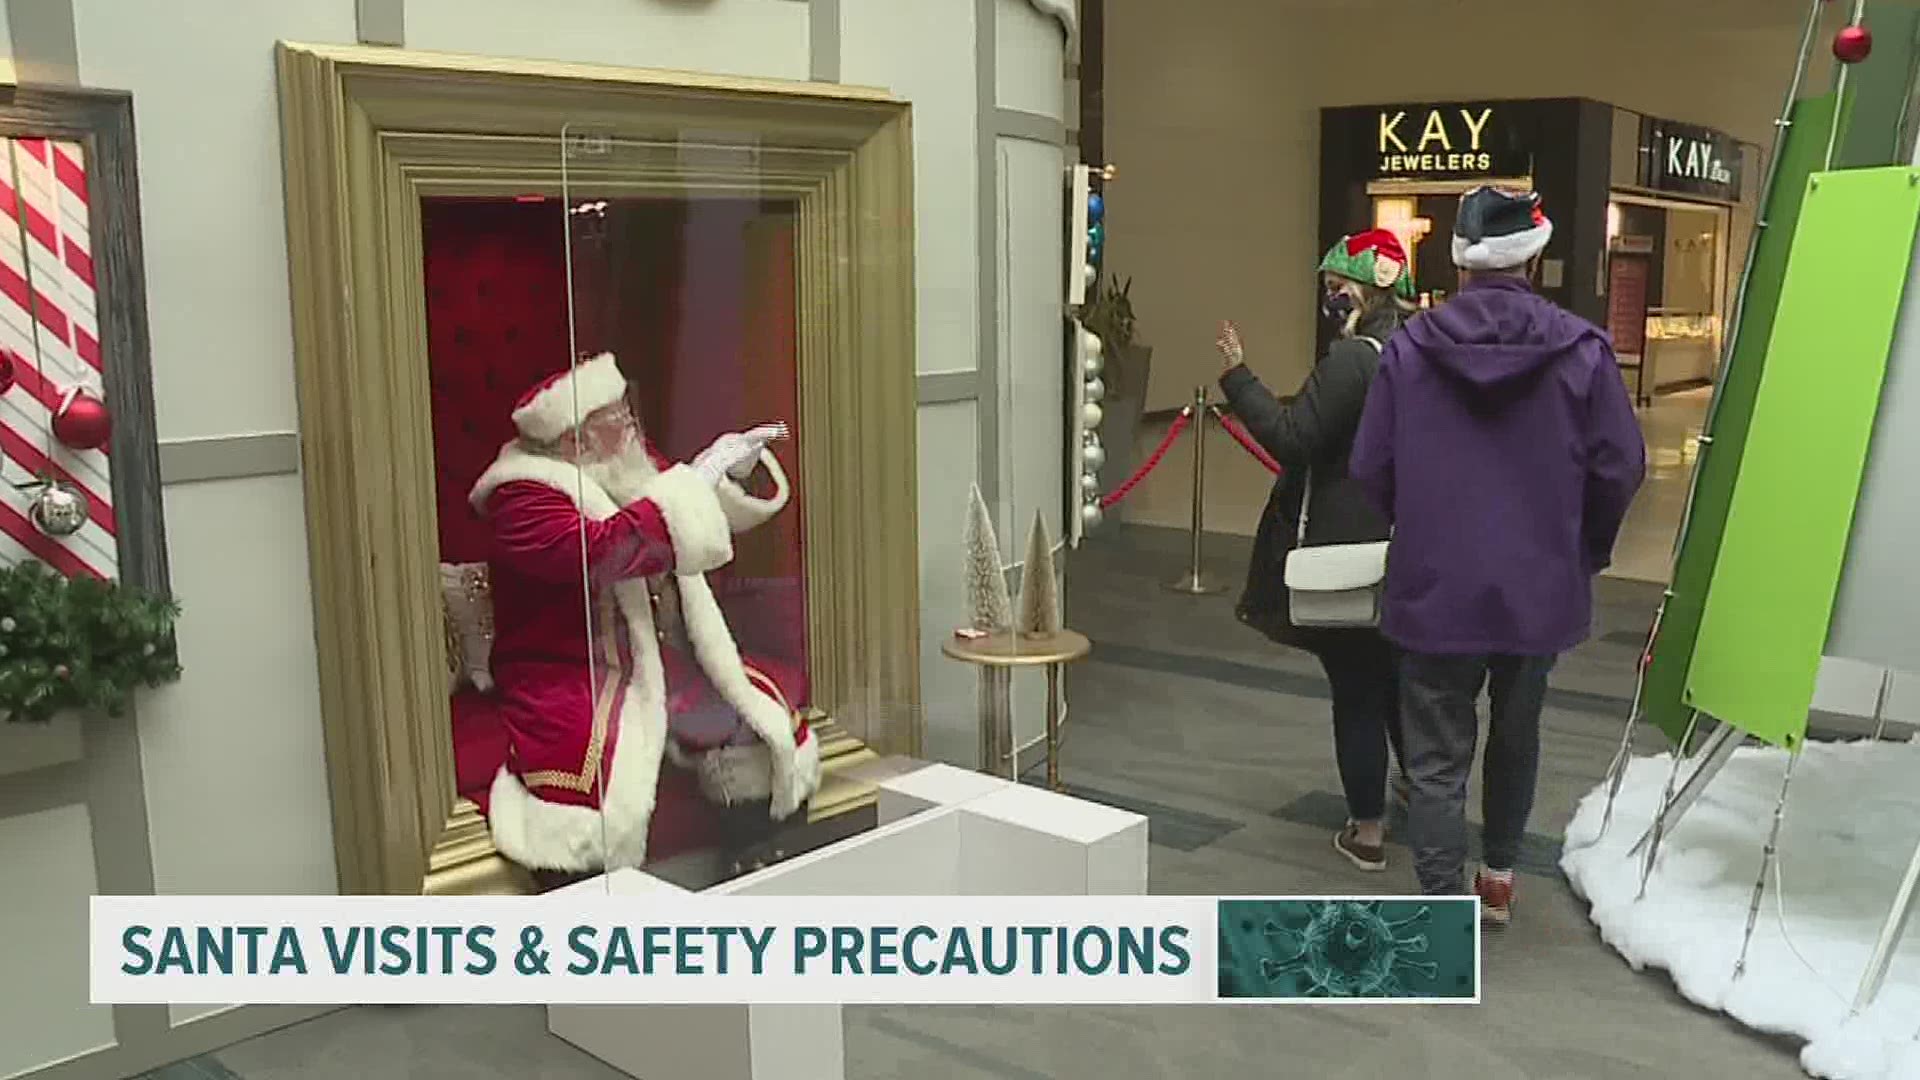 While COVID-19 safety measures will make greeting Jolly Old St. Nick a little different in 2020, he'll be available to greet children in several Central PA locations